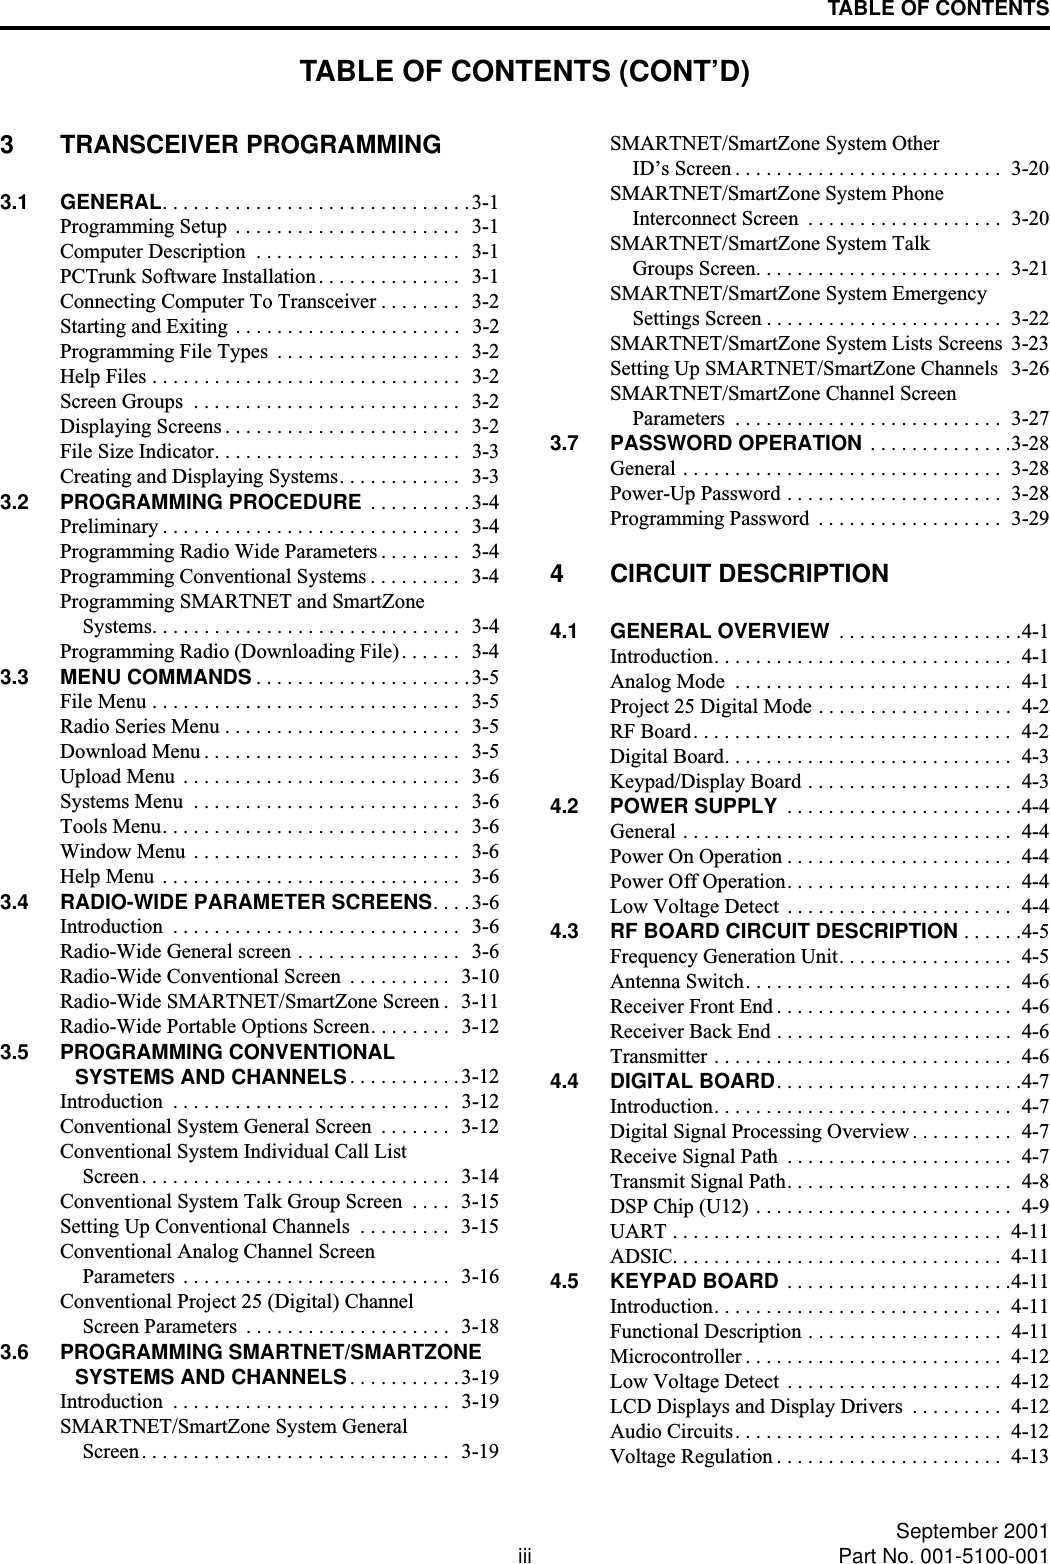 TABLE OF CONTENTS (CONT’D)iii September 2001Part No. 001-5100-001TABLE OF CONTENTS3 TRANSCEIVER PROGRAMMING3.1 GENERAL. . . . . . . . . . . . . . . . . . . . . . . . . . . . . .3-1Programming Setup  . . . . . . . . . . . . . . . . . . . . . .  3-1Computer Description  . . . . . . . . . . . . . . . . . . . .  3-1PCTrunk Software Installation . . . . . . . . . . . . . .  3-1Connecting Computer To Transceiver . . . . . . . .  3-2Starting and Exiting . . . . . . . . . . . . . . . . . . . . . .  3-2Programming File Types  . . . . . . . . . . . . . . . . . .  3-2Help Files . . . . . . . . . . . . . . . . . . . . . . . . . . . . . .  3-2Screen Groups  . . . . . . . . . . . . . . . . . . . . . . . . . .  3-2Displaying Screens . . . . . . . . . . . . . . . . . . . . . . .  3-2File Size Indicator. . . . . . . . . . . . . . . . . . . . . . . .  3-3Creating and Displaying Systems. . . . . . . . . . . .   3-33.2 PROGRAMMING PROCEDURE  . . . . . . . . . .3-4Preliminary . . . . . . . . . . . . . . . . . . . . . . . . . . . . .  3-4Programming Radio Wide Parameters . . . . . . . .  3-4Programming Conventional Systems . . . . . . . . .   3-4Programming SMARTNET and SmartZoneSystems. . . . . . . . . . . . . . . . . . . . . . . . . . . . . .  3-4Programming Radio (Downloading File). . . . . .  3-43.3 MENU COMMANDS . . . . . . . . . . . . . . . . . . . . .3-5File Menu . . . . . . . . . . . . . . . . . . . . . . . . . . . . . .  3-5Radio Series Menu . . . . . . . . . . . . . . . . . . . . . . .  3-5Download Menu . . . . . . . . . . . . . . . . . . . . . . . . .  3-5Upload Menu  . . . . . . . . . . . . . . . . . . . . . . . . . . .  3-6Systems Menu  . . . . . . . . . . . . . . . . . . . . . . . . . .  3-6Tools Menu. . . . . . . . . . . . . . . . . . . . . . . . . . . . .  3-6Window Menu  . . . . . . . . . . . . . . . . . . . . . . . . . .  3-6Help Menu  . . . . . . . . . . . . . . . . . . . . . . . . . . . . .  3-63.4 RADIO-WIDE PARAMETER SCREENS. . . .3-6Introduction  . . . . . . . . . . . . . . . . . . . . . . . . . . . .  3-6Radio-Wide General screen . . . . . . . . . . . . . . . .  3-6Radio-Wide Conventional Screen  . . . . . . . . . .   3-10Radio-Wide SMARTNET/SmartZone Screen .   3-11Radio-Wide Portable Options Screen. . . . . . . .  3-123.5 PROGRAMMING CONVENTIONALSYSTEMS AND CHANNELS. . . . . . . . . . .3-12Introduction  . . . . . . . . . . . . . . . . . . . . . . . . . . .  3-12Conventional System General Screen  . . . . . . .   3-12Conventional System Individual Call ListScreen. . . . . . . . . . . . . . . . . . . . . . . . . . . . . .  3-14Conventional System Talk Group Screen  . . . .  3-15Setting Up Conventional Channels  . . . . . . . . .  3-15Conventional Analog Channel ScreenParameters  . . . . . . . . . . . . . . . . . . . . . . . . . .  3-16Conventional Project 25 (Digital) ChannelScreen Parameters  . . . . . . . . . . . . . . . . . . . .  3-183.6 PROGRAMMING SMARTNET/SMARTZONESYSTEMS AND CHANNELS. . . . . . . . . . .3-19Introduction  . . . . . . . . . . . . . . . . . . . . . . . . . . .  3-19SMARTNET/SmartZone System GeneralScreen. . . . . . . . . . . . . . . . . . . . . . . . . . . . . .  3-19SMARTNET/SmartZone System OtherID’s Screen . . . . . . . . . . . . . . . . . . . . . . . . . .  3-20SMARTNET/SmartZone System PhoneInterconnect Screen  . . . . . . . . . . . . . . . . . . .  3-20SMARTNET/SmartZone System TalkGroups Screen. . . . . . . . . . . . . . . . . . . . . . . .  3-21SMARTNET/SmartZone System EmergencySettings Screen . . . . . . . . . . . . . . . . . . . . . . .  3-22SMARTNET/SmartZone System Lists Screens  3-23Setting Up SMARTNET/SmartZone Channels  3-26SMARTNET/SmartZone Channel ScreenParameters  . . . . . . . . . . . . . . . . . . . . . . . . . .  3-273.7 PASSWORD OPERATION . . . . . . . . . . . . . .3-28General . . . . . . . . . . . . . . . . . . . . . . . . . . . . . . .  3-28Power-Up Password . . . . . . . . . . . . . . . . . . . . .  3-28Programming Password  . . . . . . . . . . . . . . . . . .  3-294 CIRCUIT DESCRIPTION4.1 GENERAL OVERVIEW  . . . . . . . . . . . . . . . . . .4-1Introduction. . . . . . . . . . . . . . . . . . . . . . . . . . . . .  4-1Analog Mode  . . . . . . . . . . . . . . . . . . . . . . . . . . .  4-1Project 25 Digital Mode . . . . . . . . . . . . . . . . . . .  4-2RF Board. . . . . . . . . . . . . . . . . . . . . . . . . . . . . . .  4-2Digital Board. . . . . . . . . . . . . . . . . . . . . . . . . . . .  4-3Keypad/Display Board . . . . . . . . . . . . . . . . . . . .  4-34.2 POWER SUPPLY  . . . . . . . . . . . . . . . . . . . . . . .4-4General . . . . . . . . . . . . . . . . . . . . . . . . . . . . . . . .  4-4Power On Operation . . . . . . . . . . . . . . . . . . . . . .  4-4Power Off Operation. . . . . . . . . . . . . . . . . . . . . .  4-4Low Voltage Detect  . . . . . . . . . . . . . . . . . . . . . .  4-44.3 RF BOARD CIRCUIT DESCRIPTION . . . . . .4-5Frequency Generation Unit. . . . . . . . . . . . . . . . .  4-5Antenna Switch. . . . . . . . . . . . . . . . . . . . . . . . . .  4-6Receiver Front End . . . . . . . . . . . . . . . . . . . . . . .  4-6Receiver Back End . . . . . . . . . . . . . . . . . . . . . . .  4-6Transmitter . . . . . . . . . . . . . . . . . . . . . . . . . . . . .  4-64.4 DIGITAL BOARD. . . . . . . . . . . . . . . . . . . . . . . .4-7Introduction. . . . . . . . . . . . . . . . . . . . . . . . . . . . .  4-7Digital Signal Processing Overview . . . . . . . . . .  4-7Receive Signal Path  . . . . . . . . . . . . . . . . . . . . . .  4-7Transmit Signal Path. . . . . . . . . . . . . . . . . . . . . .  4-8DSP Chip (U12) . . . . . . . . . . . . . . . . . . . . . . . . .  4-9UART . . . . . . . . . . . . . . . . . . . . . . . . . . . . . . . .  4-11ADSIC. . . . . . . . . . . . . . . . . . . . . . . . . . . . . . . .  4-114.5 KEYPAD BOARD . . . . . . . . . . . . . . . . . . . . . .4-11Introduction. . . . . . . . . . . . . . . . . . . . . . . . . . . .  4-11Functional Description . . . . . . . . . . . . . . . . . . .  4-11Microcontroller . . . . . . . . . . . . . . . . . . . . . . . . .  4-12Low Voltage Detect  . . . . . . . . . . . . . . . . . . . . .  4-12LCD Displays and Display Drivers  . . . . . . . . .  4-12Audio Circuits. . . . . . . . . . . . . . . . . . . . . . . . . .  4-12Voltage Regulation . . . . . . . . . . . . . . . . . . . . . .  4-13